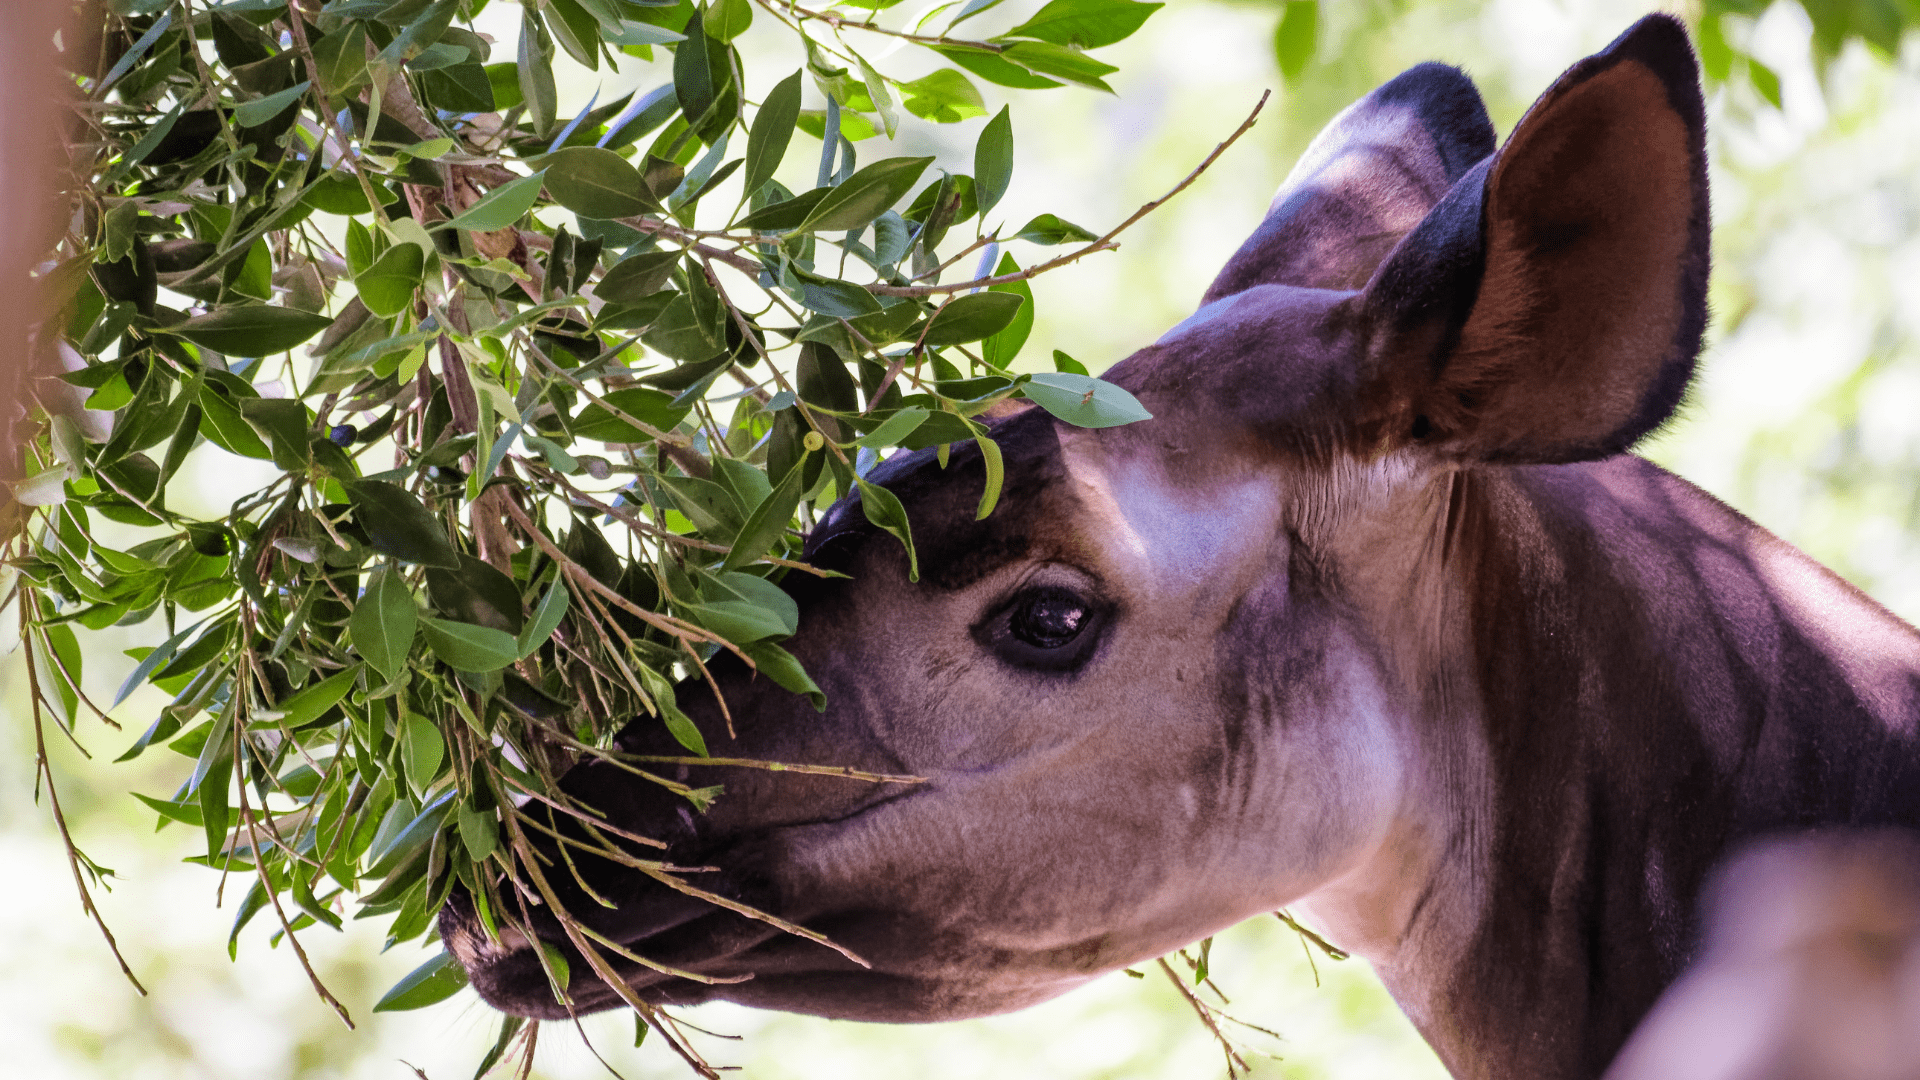 A close up of an endangered Okapi's face grazing on leaves